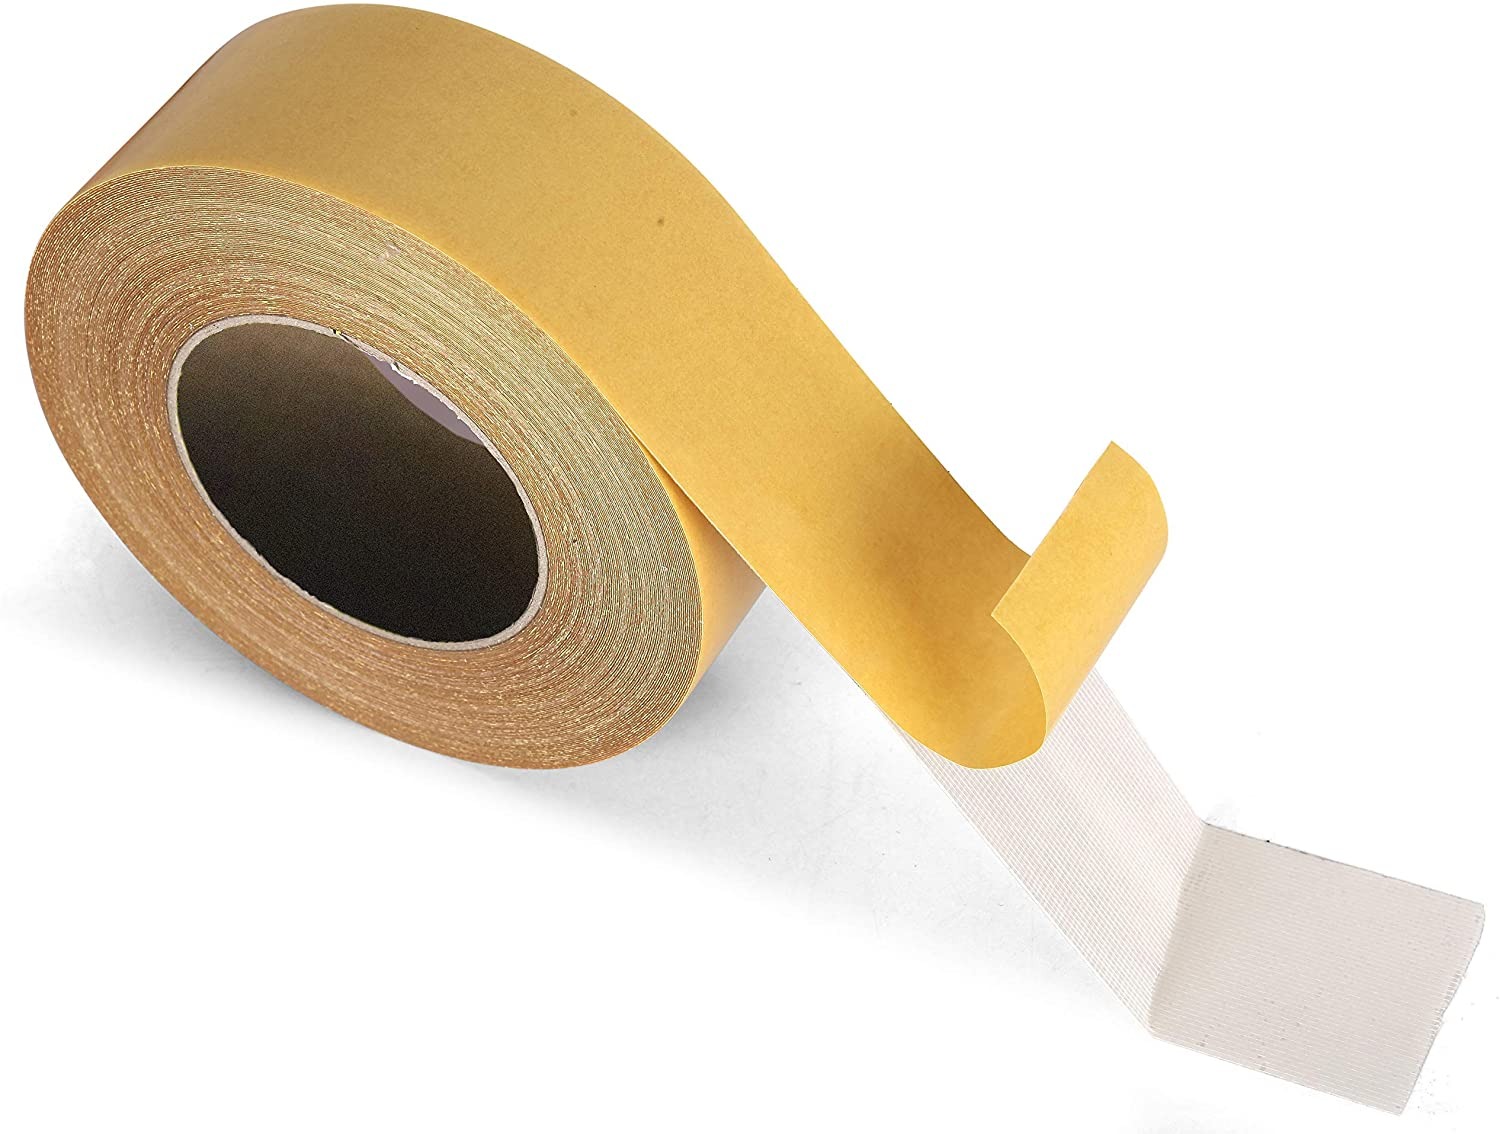 mothers day presale 48 off waterproof doublesided carpet tape10mbuy 2 get 1 free nowssjp4